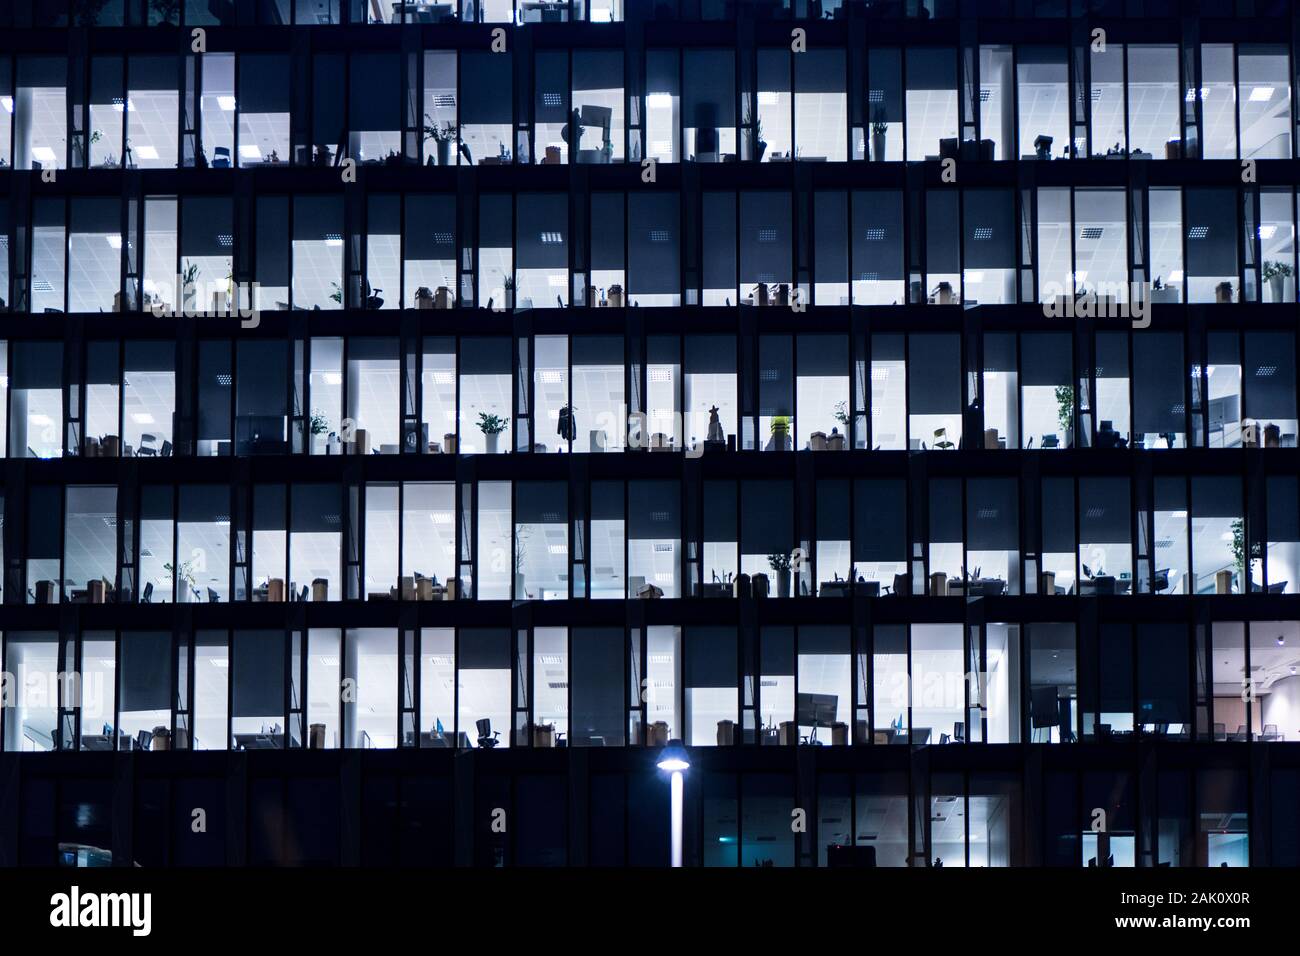 Office Building At Night. Late night at work. Glass curtain wall office  building. Office building exterior in the late evening with interior lights  on Stock Photo - Alamy